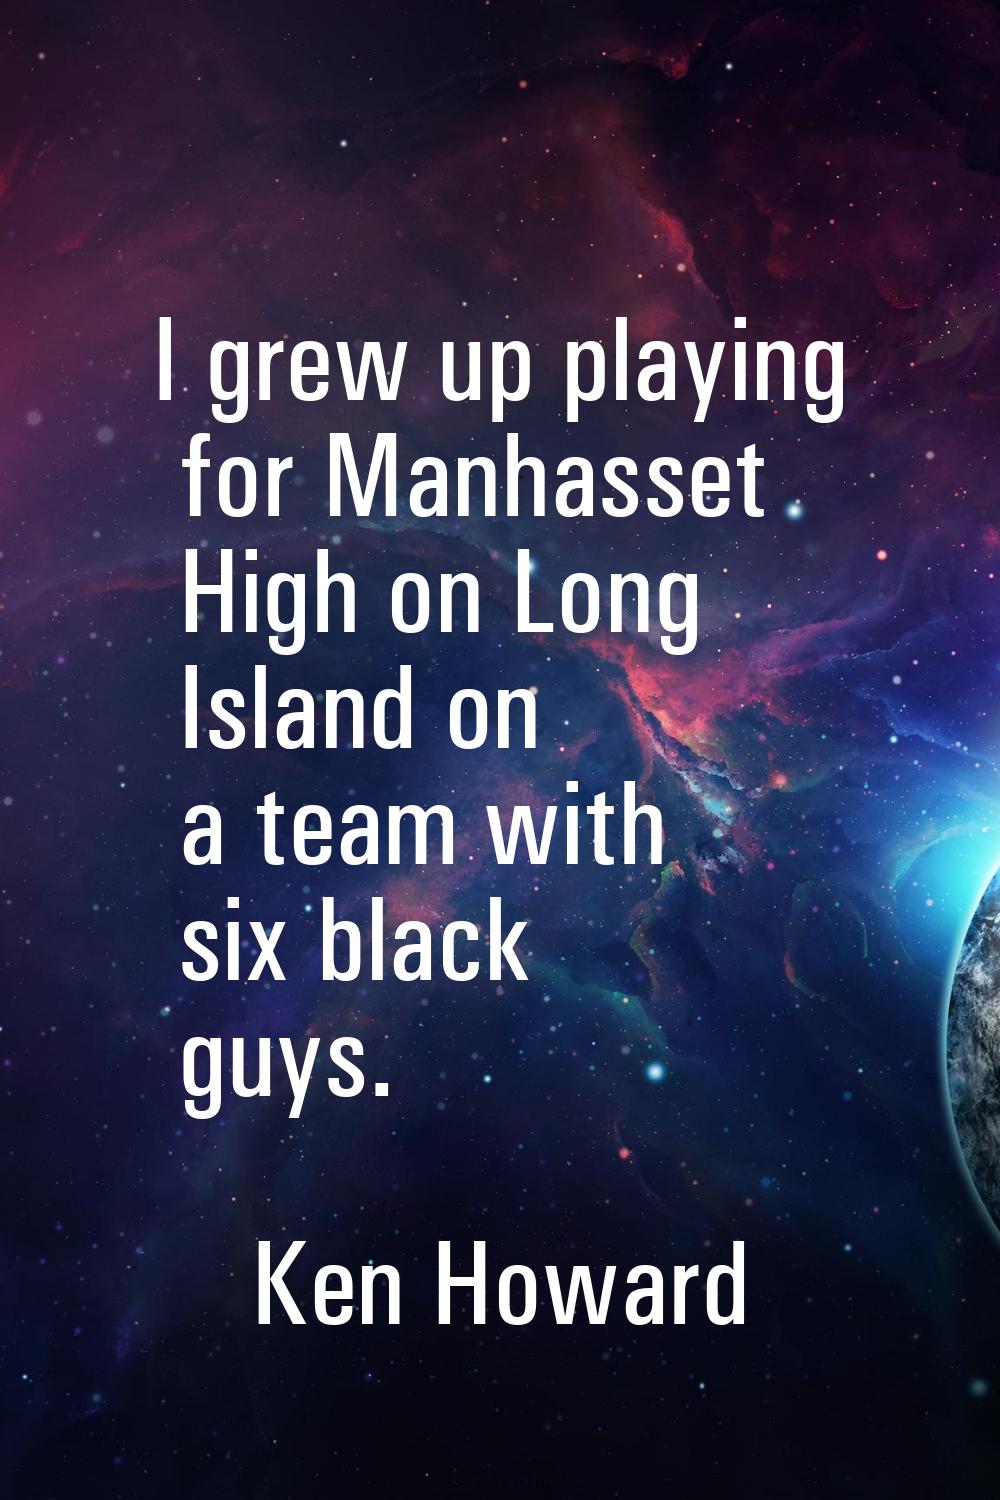 I grew up playing for Manhasset High on Long Island on a team with six black guys.